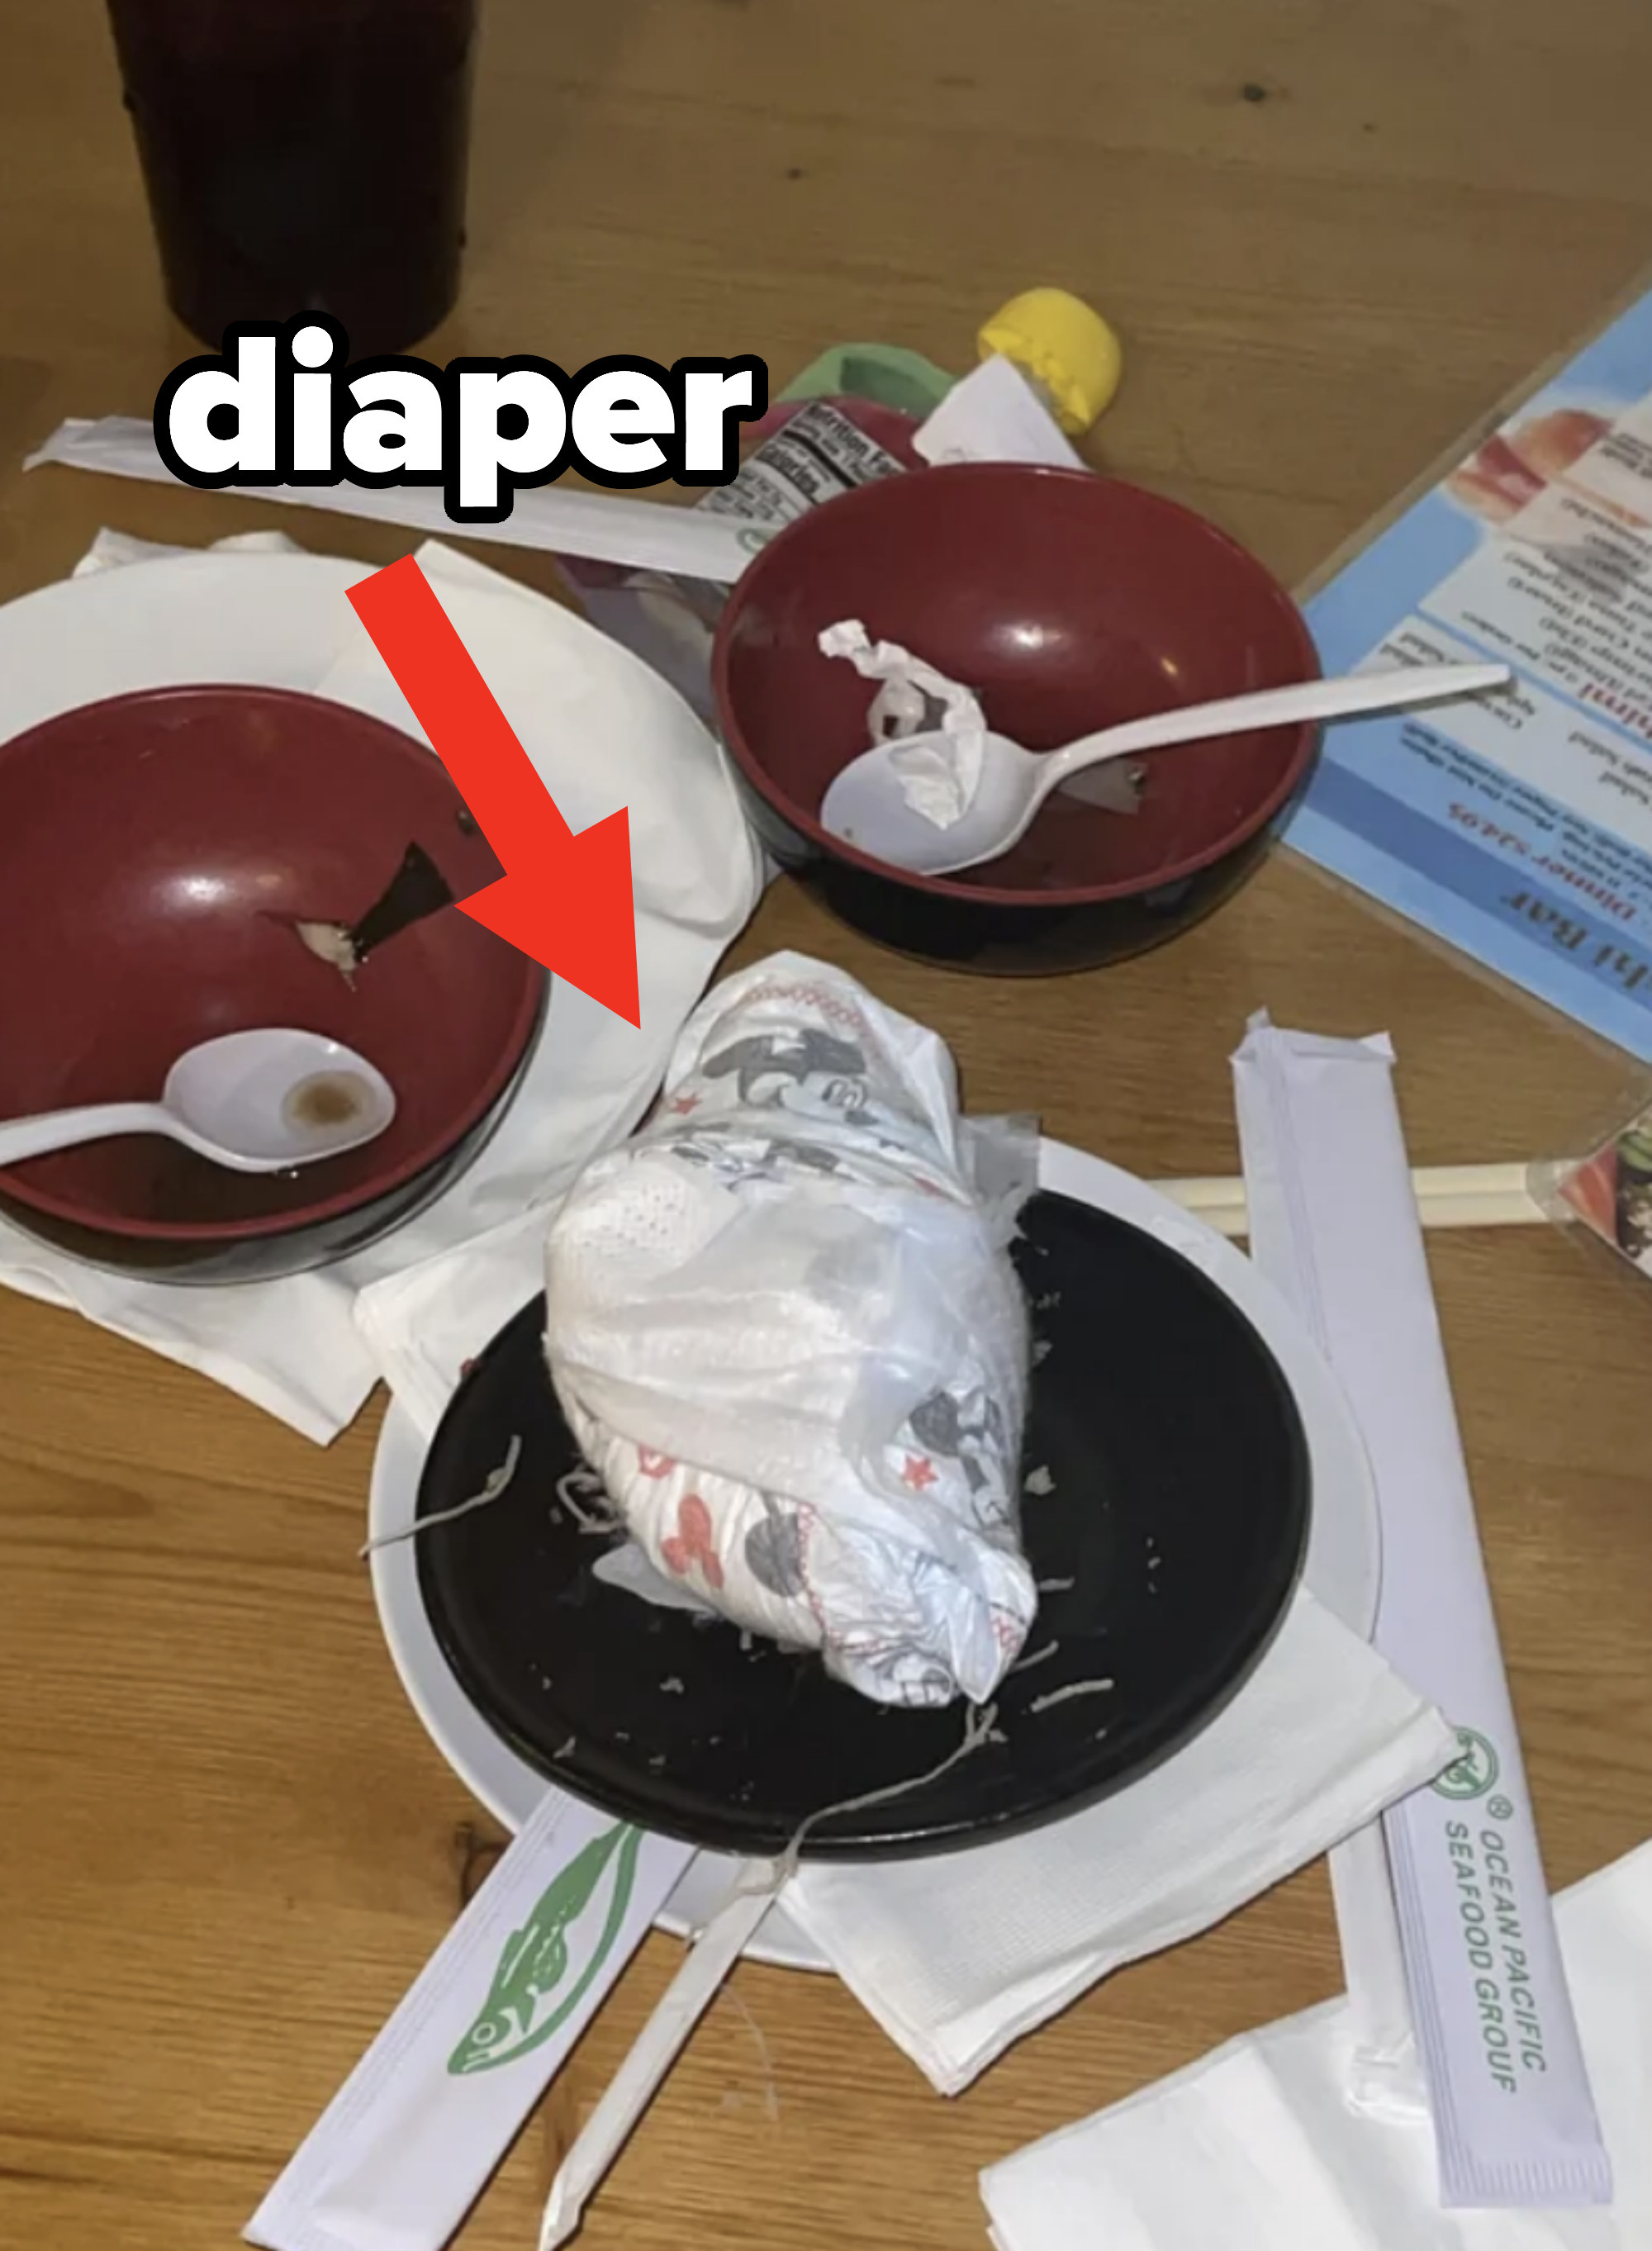 A diaper left on a restaurant table